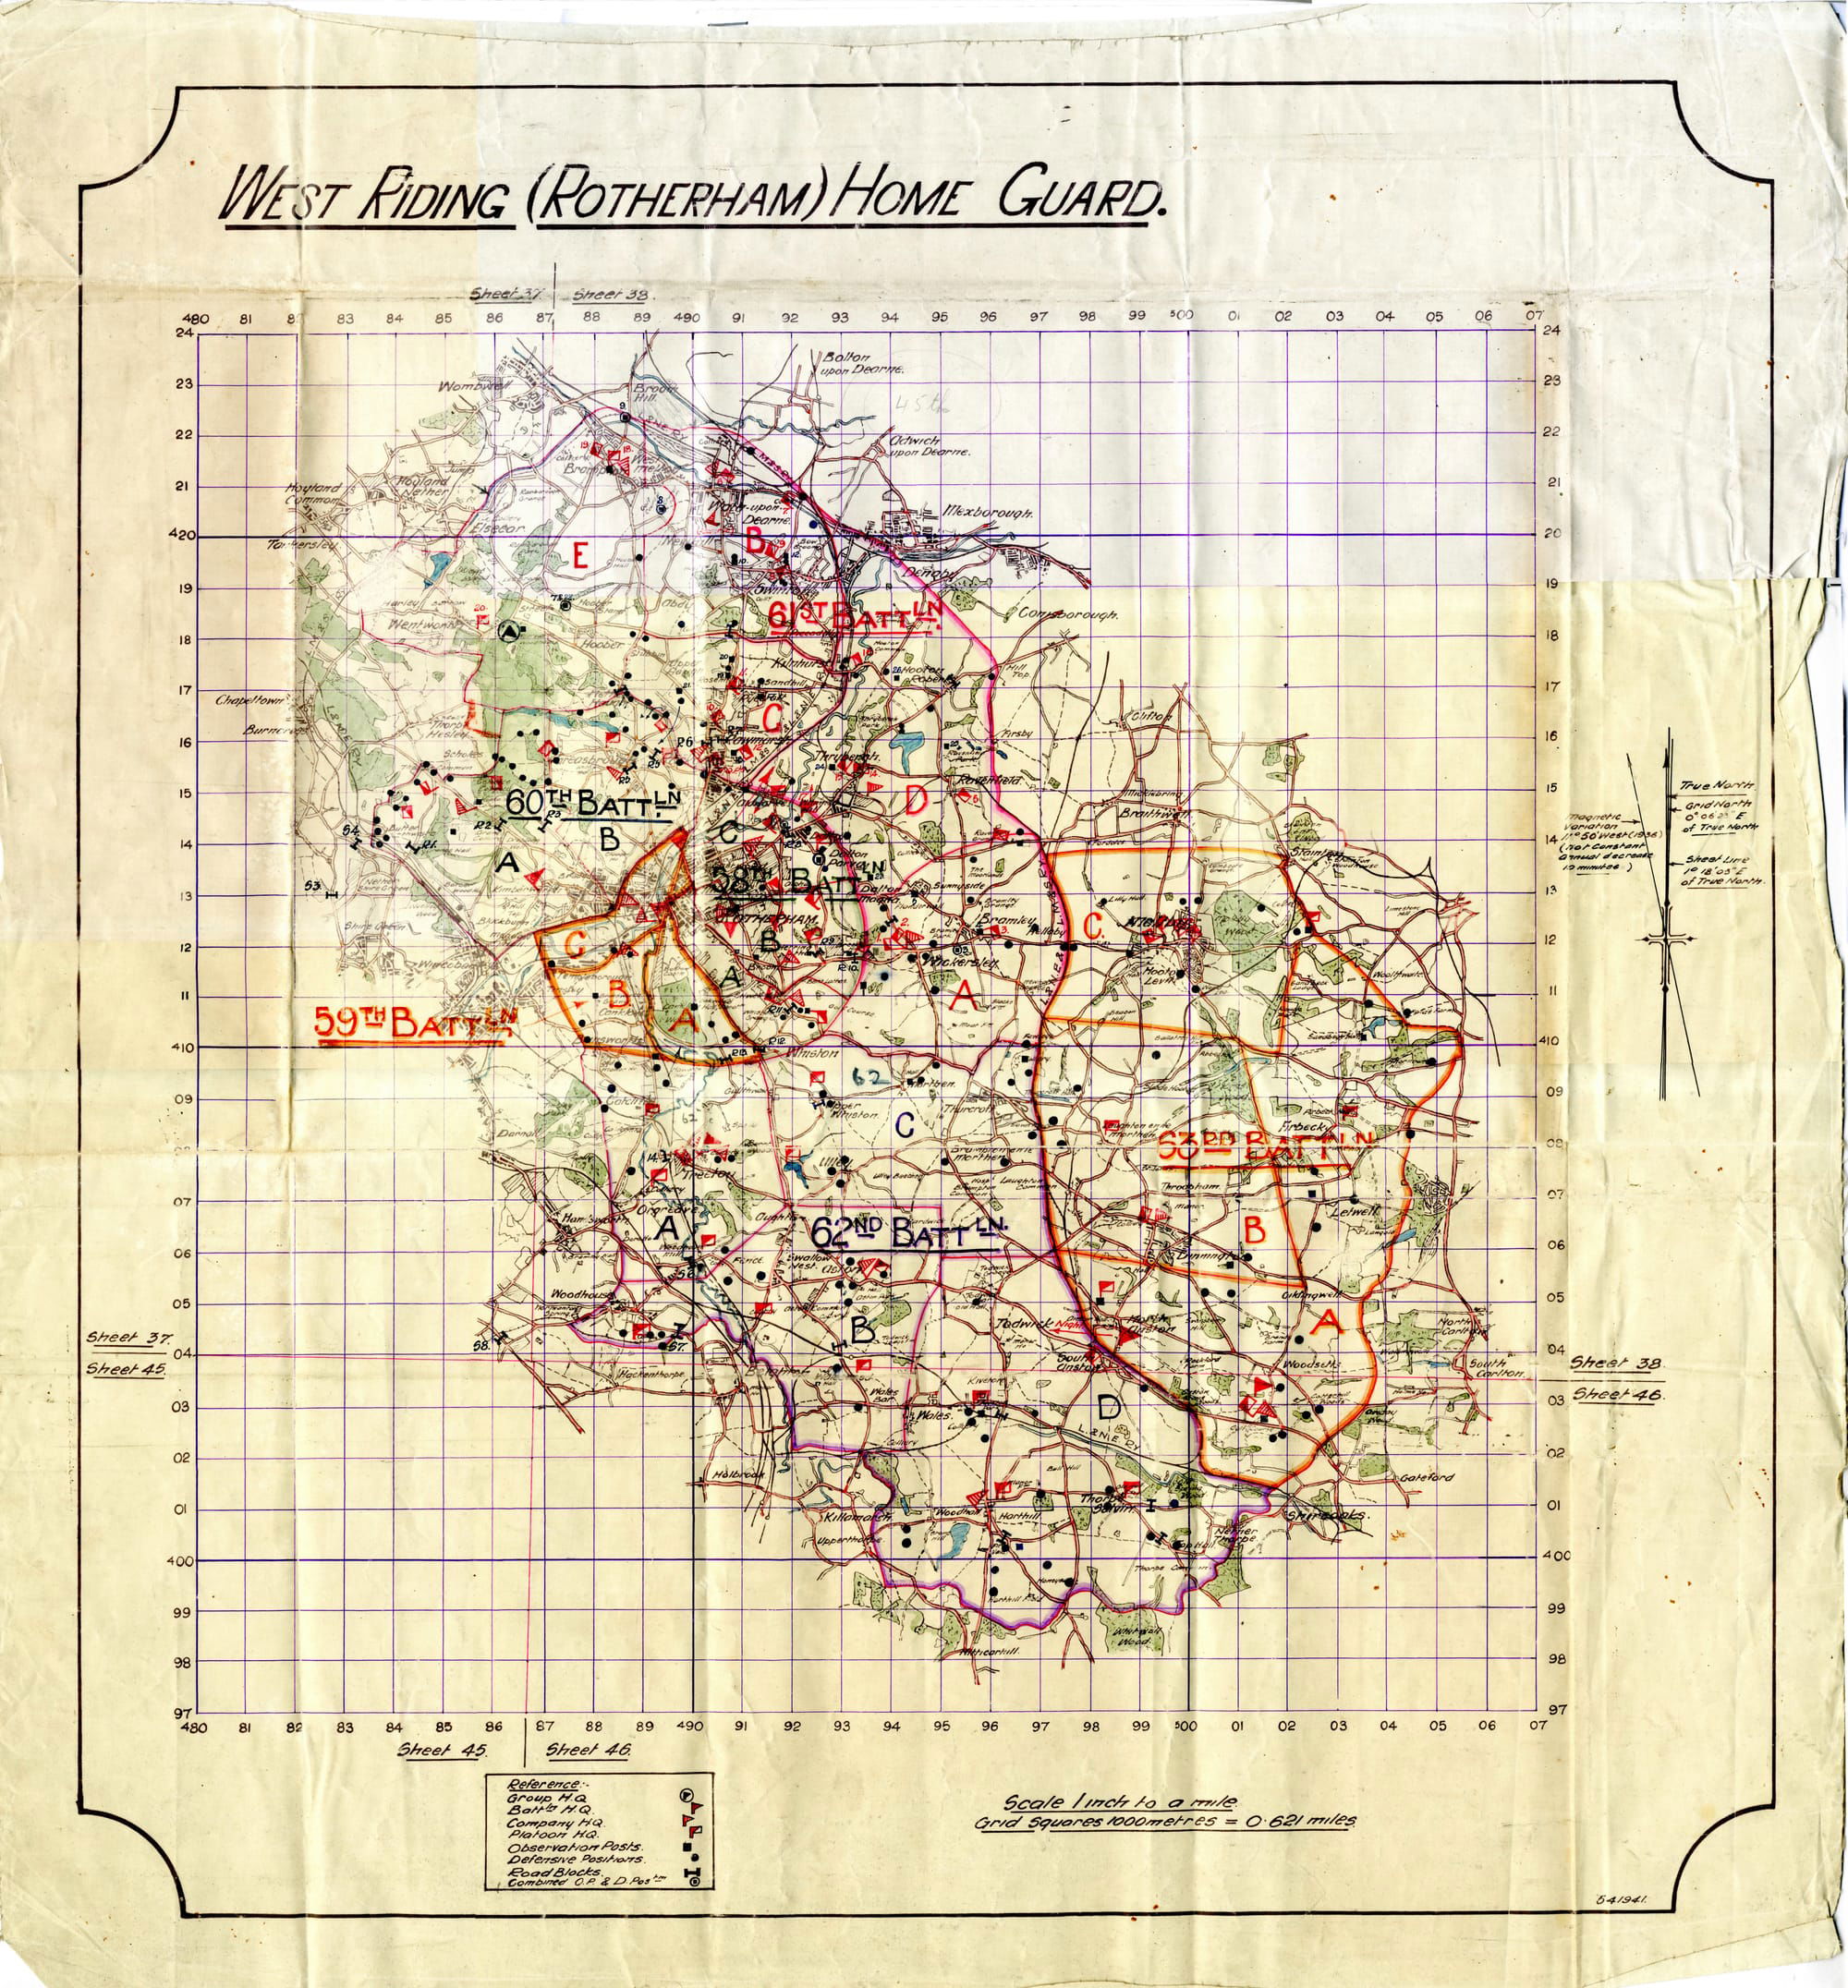 WW2 Home Guard Map of Rotherham Showing Numbered Battalions Locations.